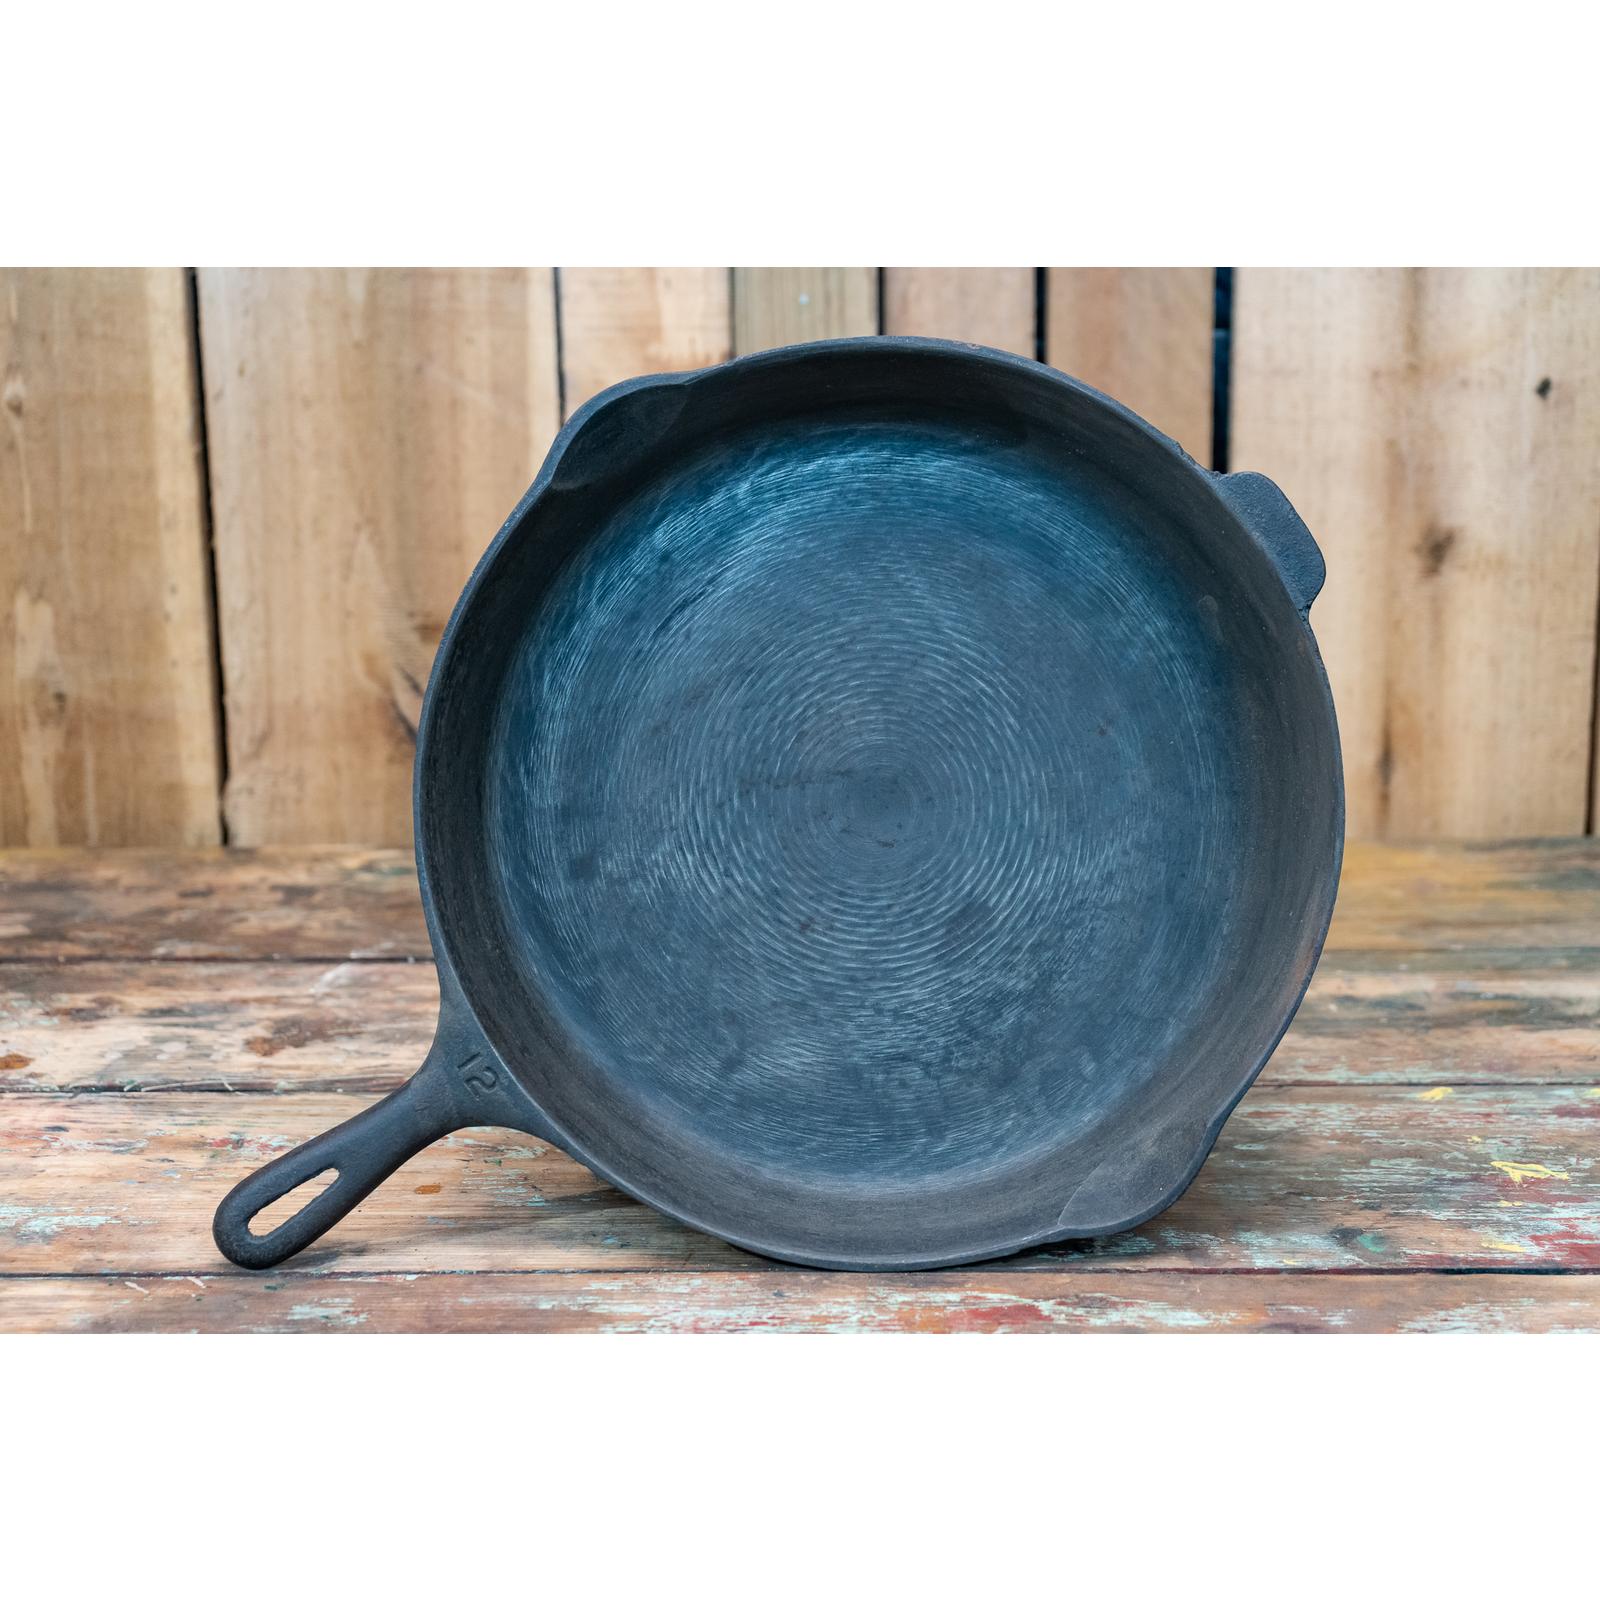 Wagner Cast Iron Skillet Auction